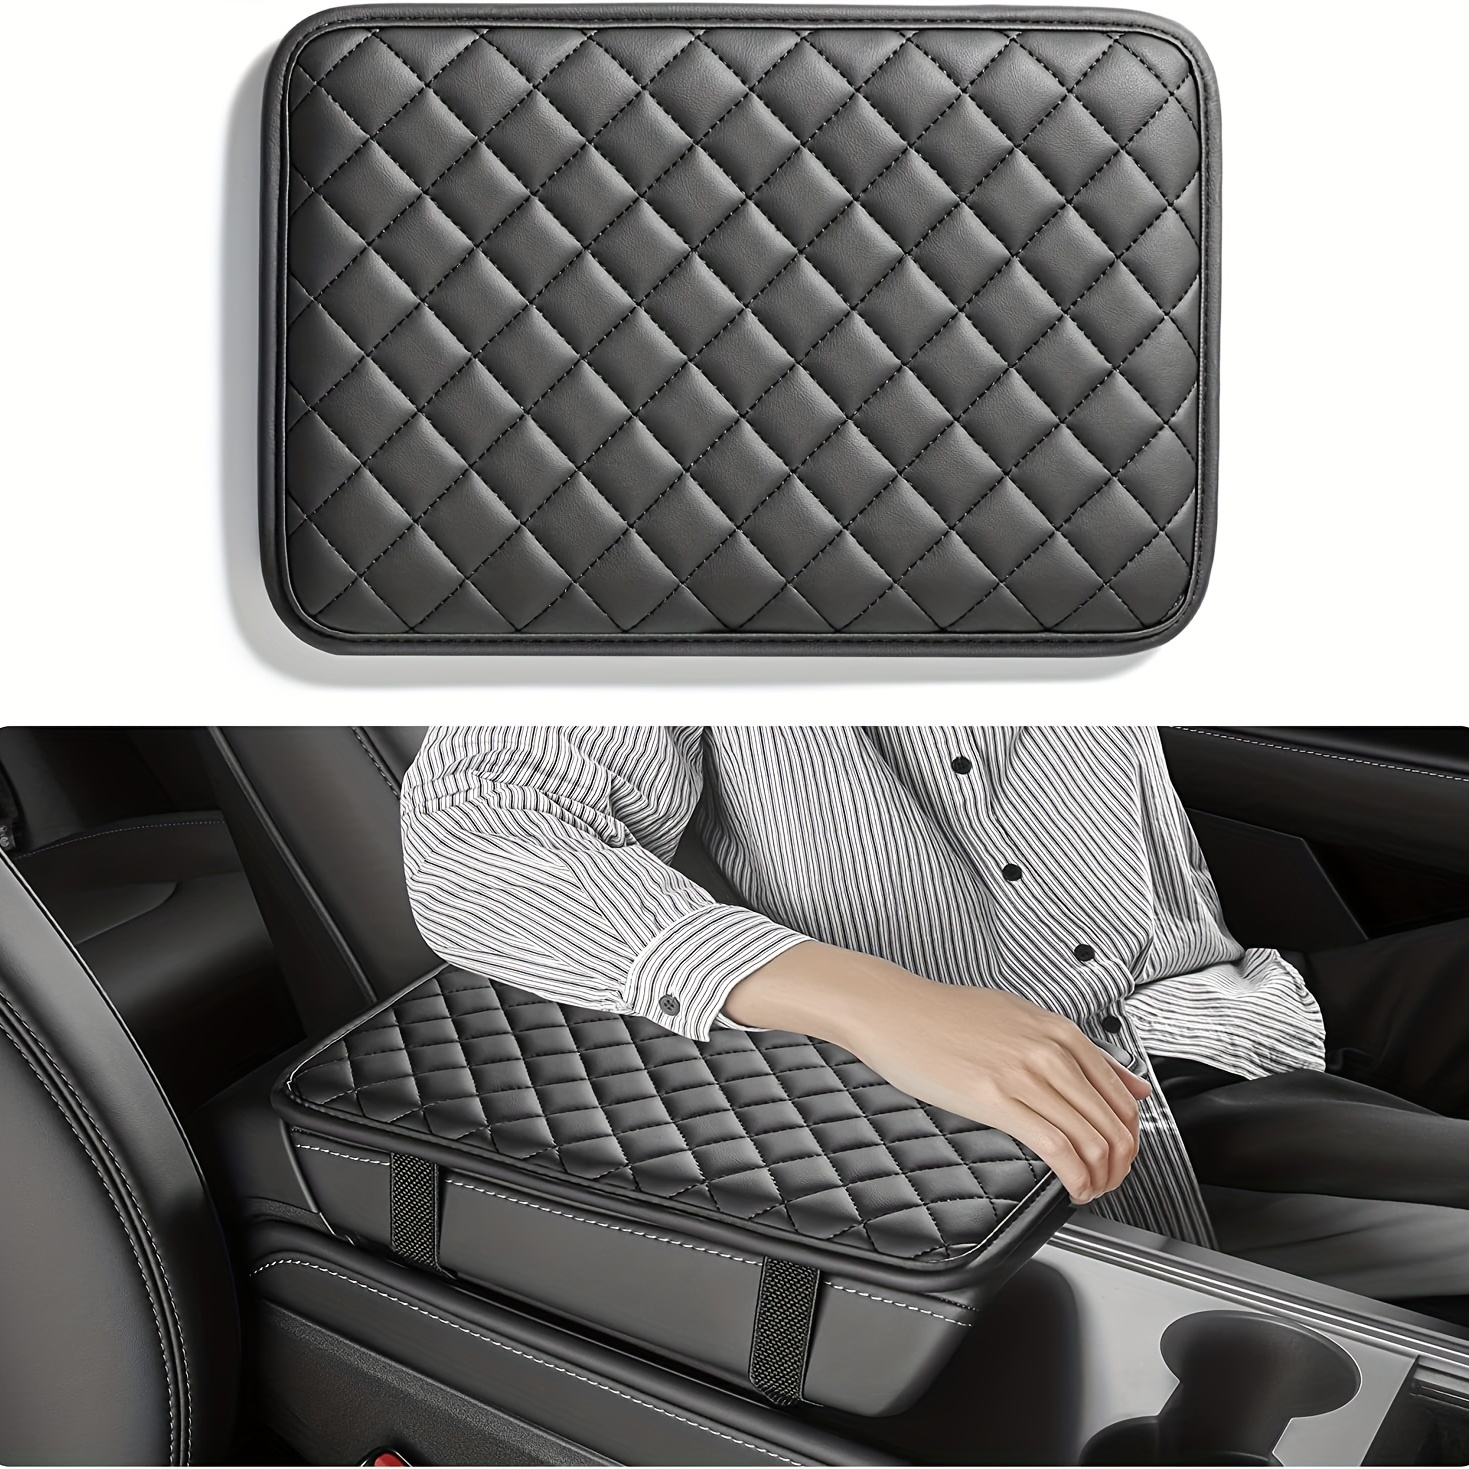 22 Pieces Leopard Car Accessories Set Grey Black Leopard Pattern Car Seat  Covers Steering Wheel Cover Car Center Console Pad Cup Coasters Seat Belt